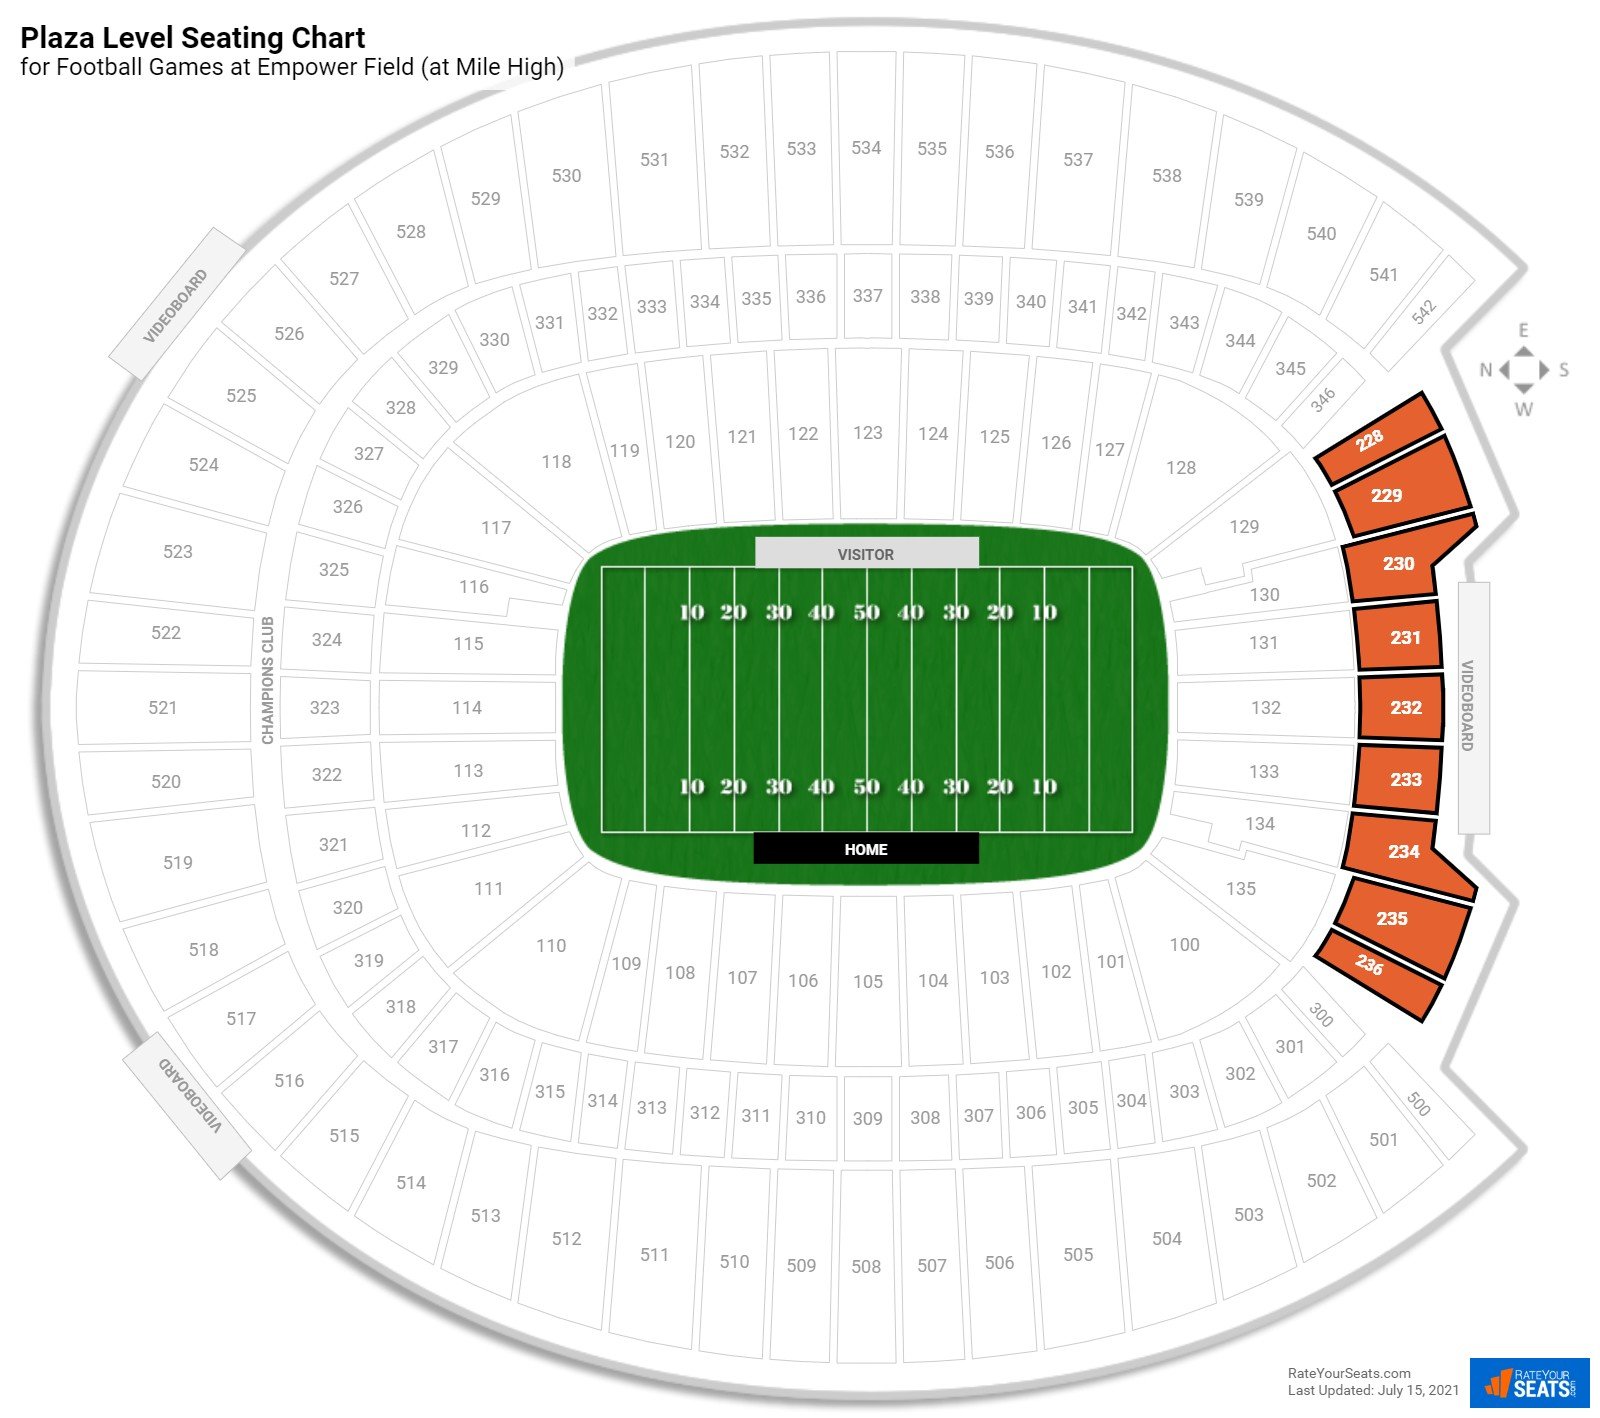 Football Plaza Level Seating Chart at Empower Field (at Mile High)